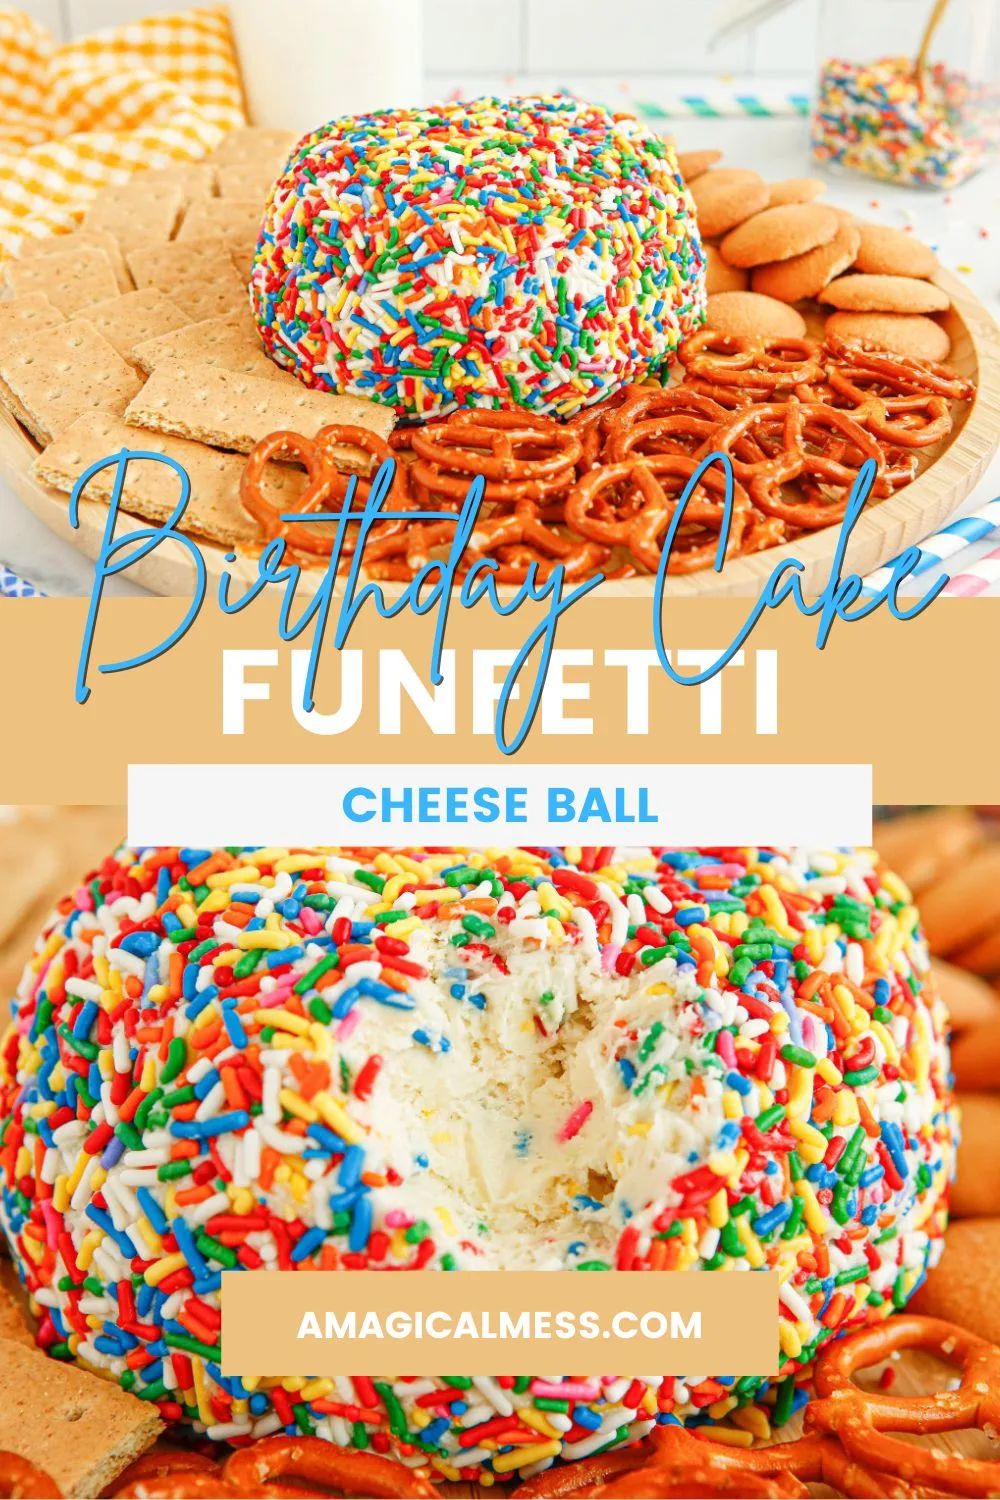 Funfetti cheese ball with pretzels, graham crackers, and cookies for dipping.